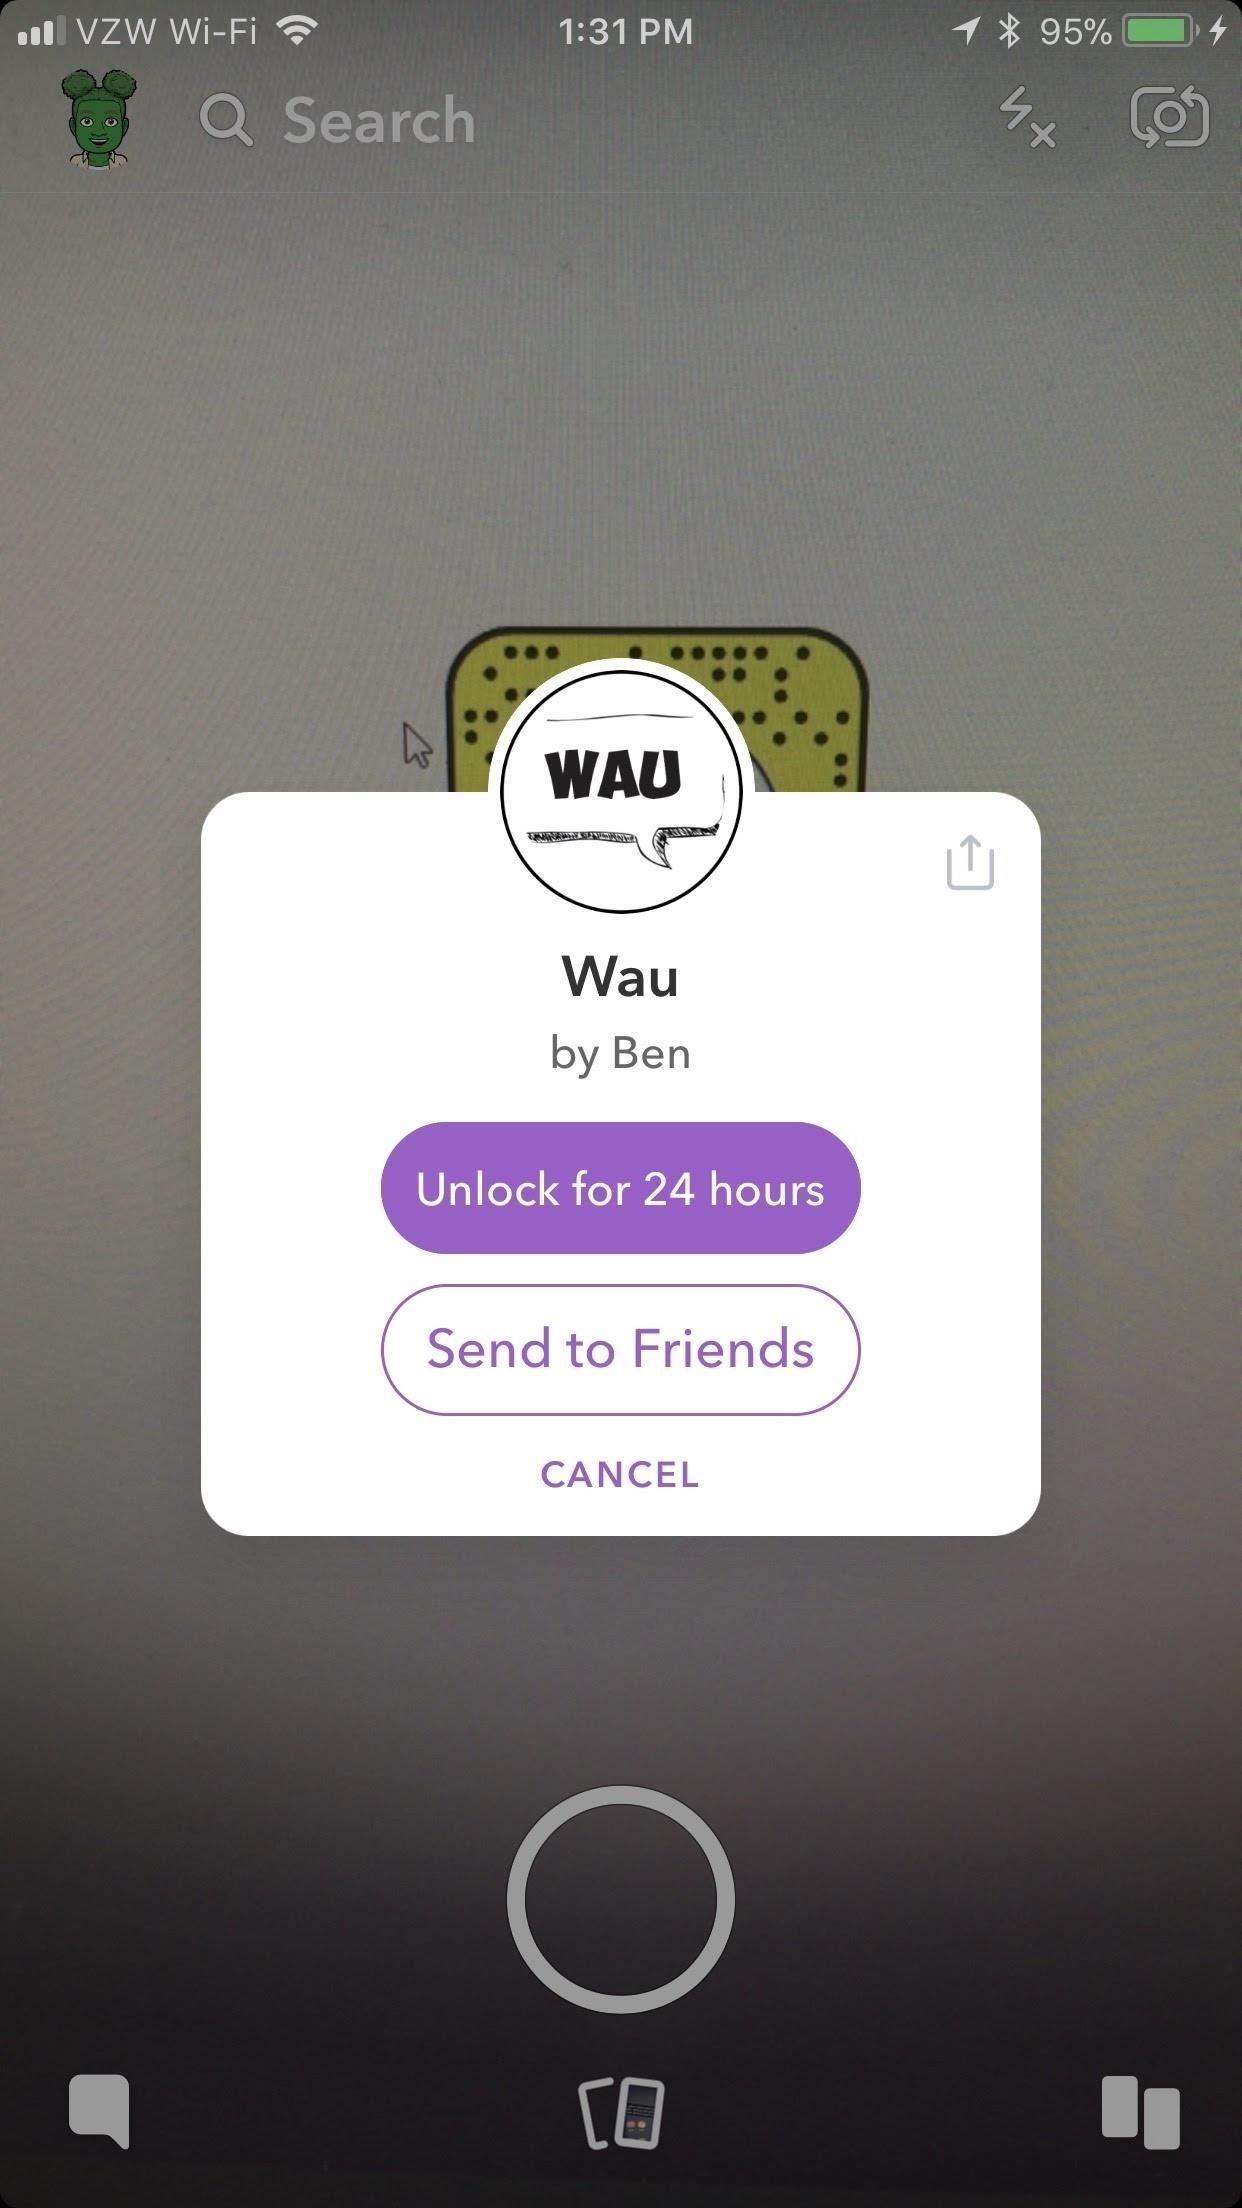 Snapchat 101: How to Share Custom Lenses & Filters with Friends That Won't Disappear